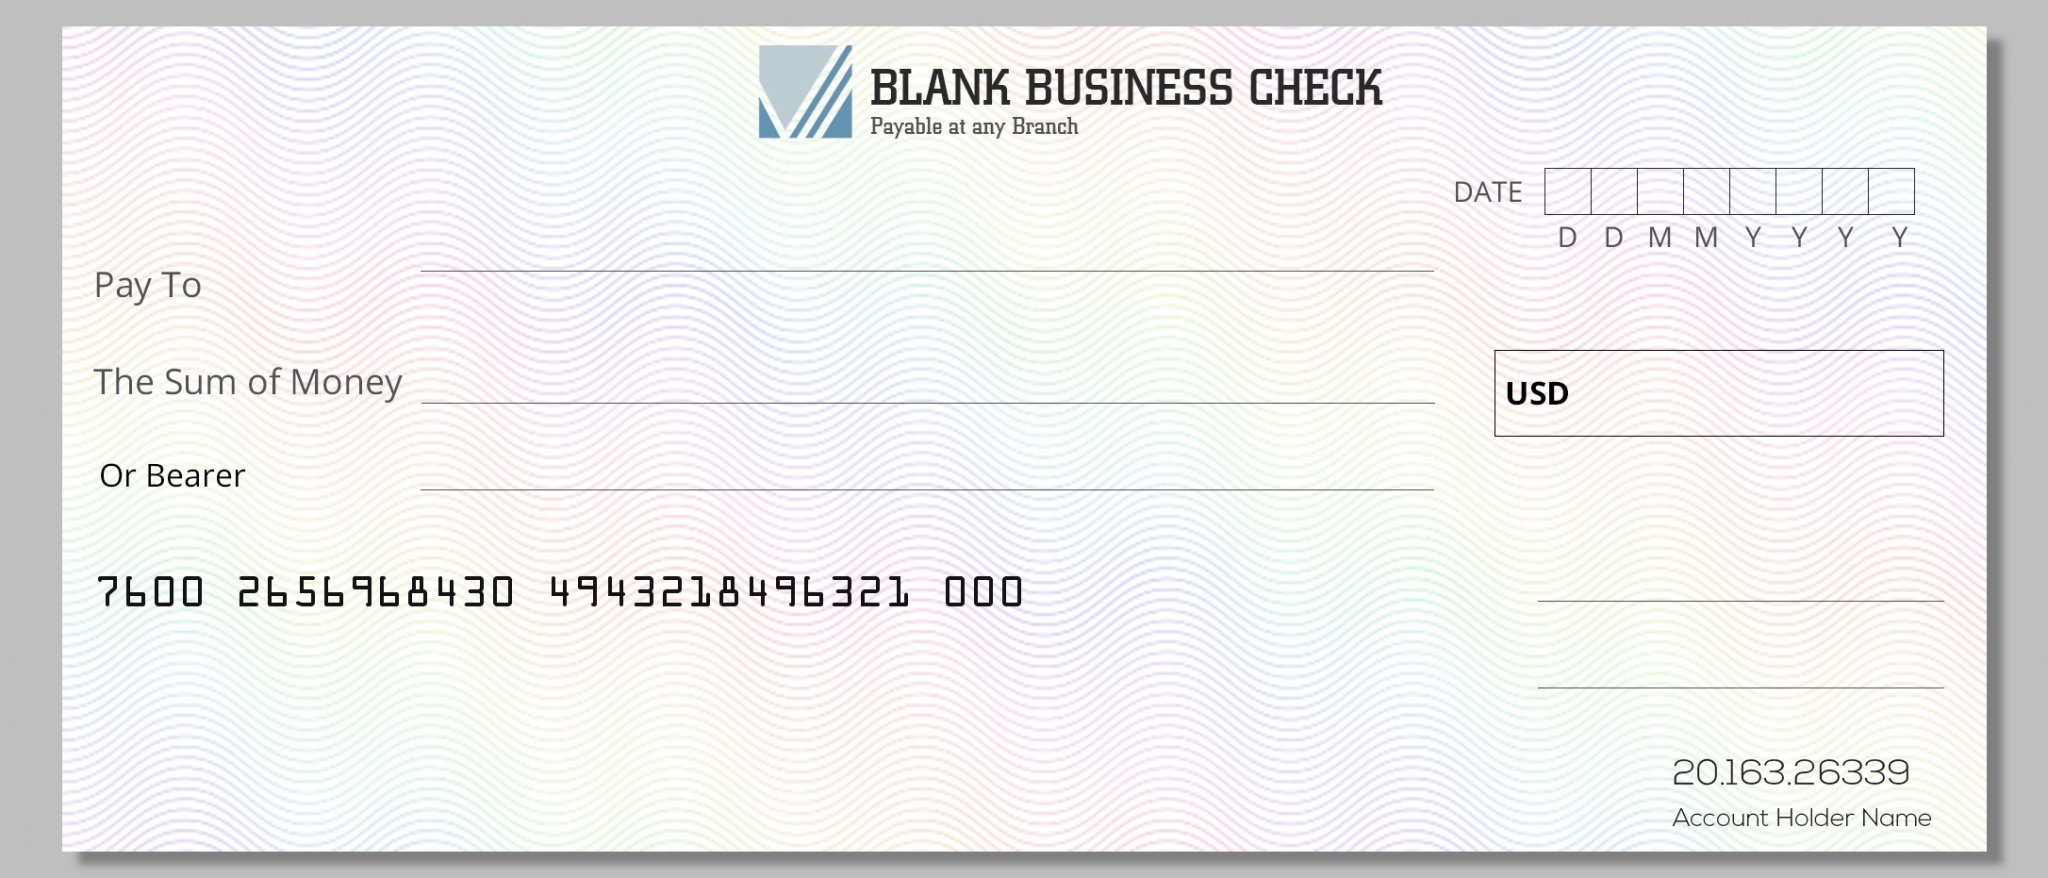 10  Printable Blank Business Check in psd photoshop room surf com